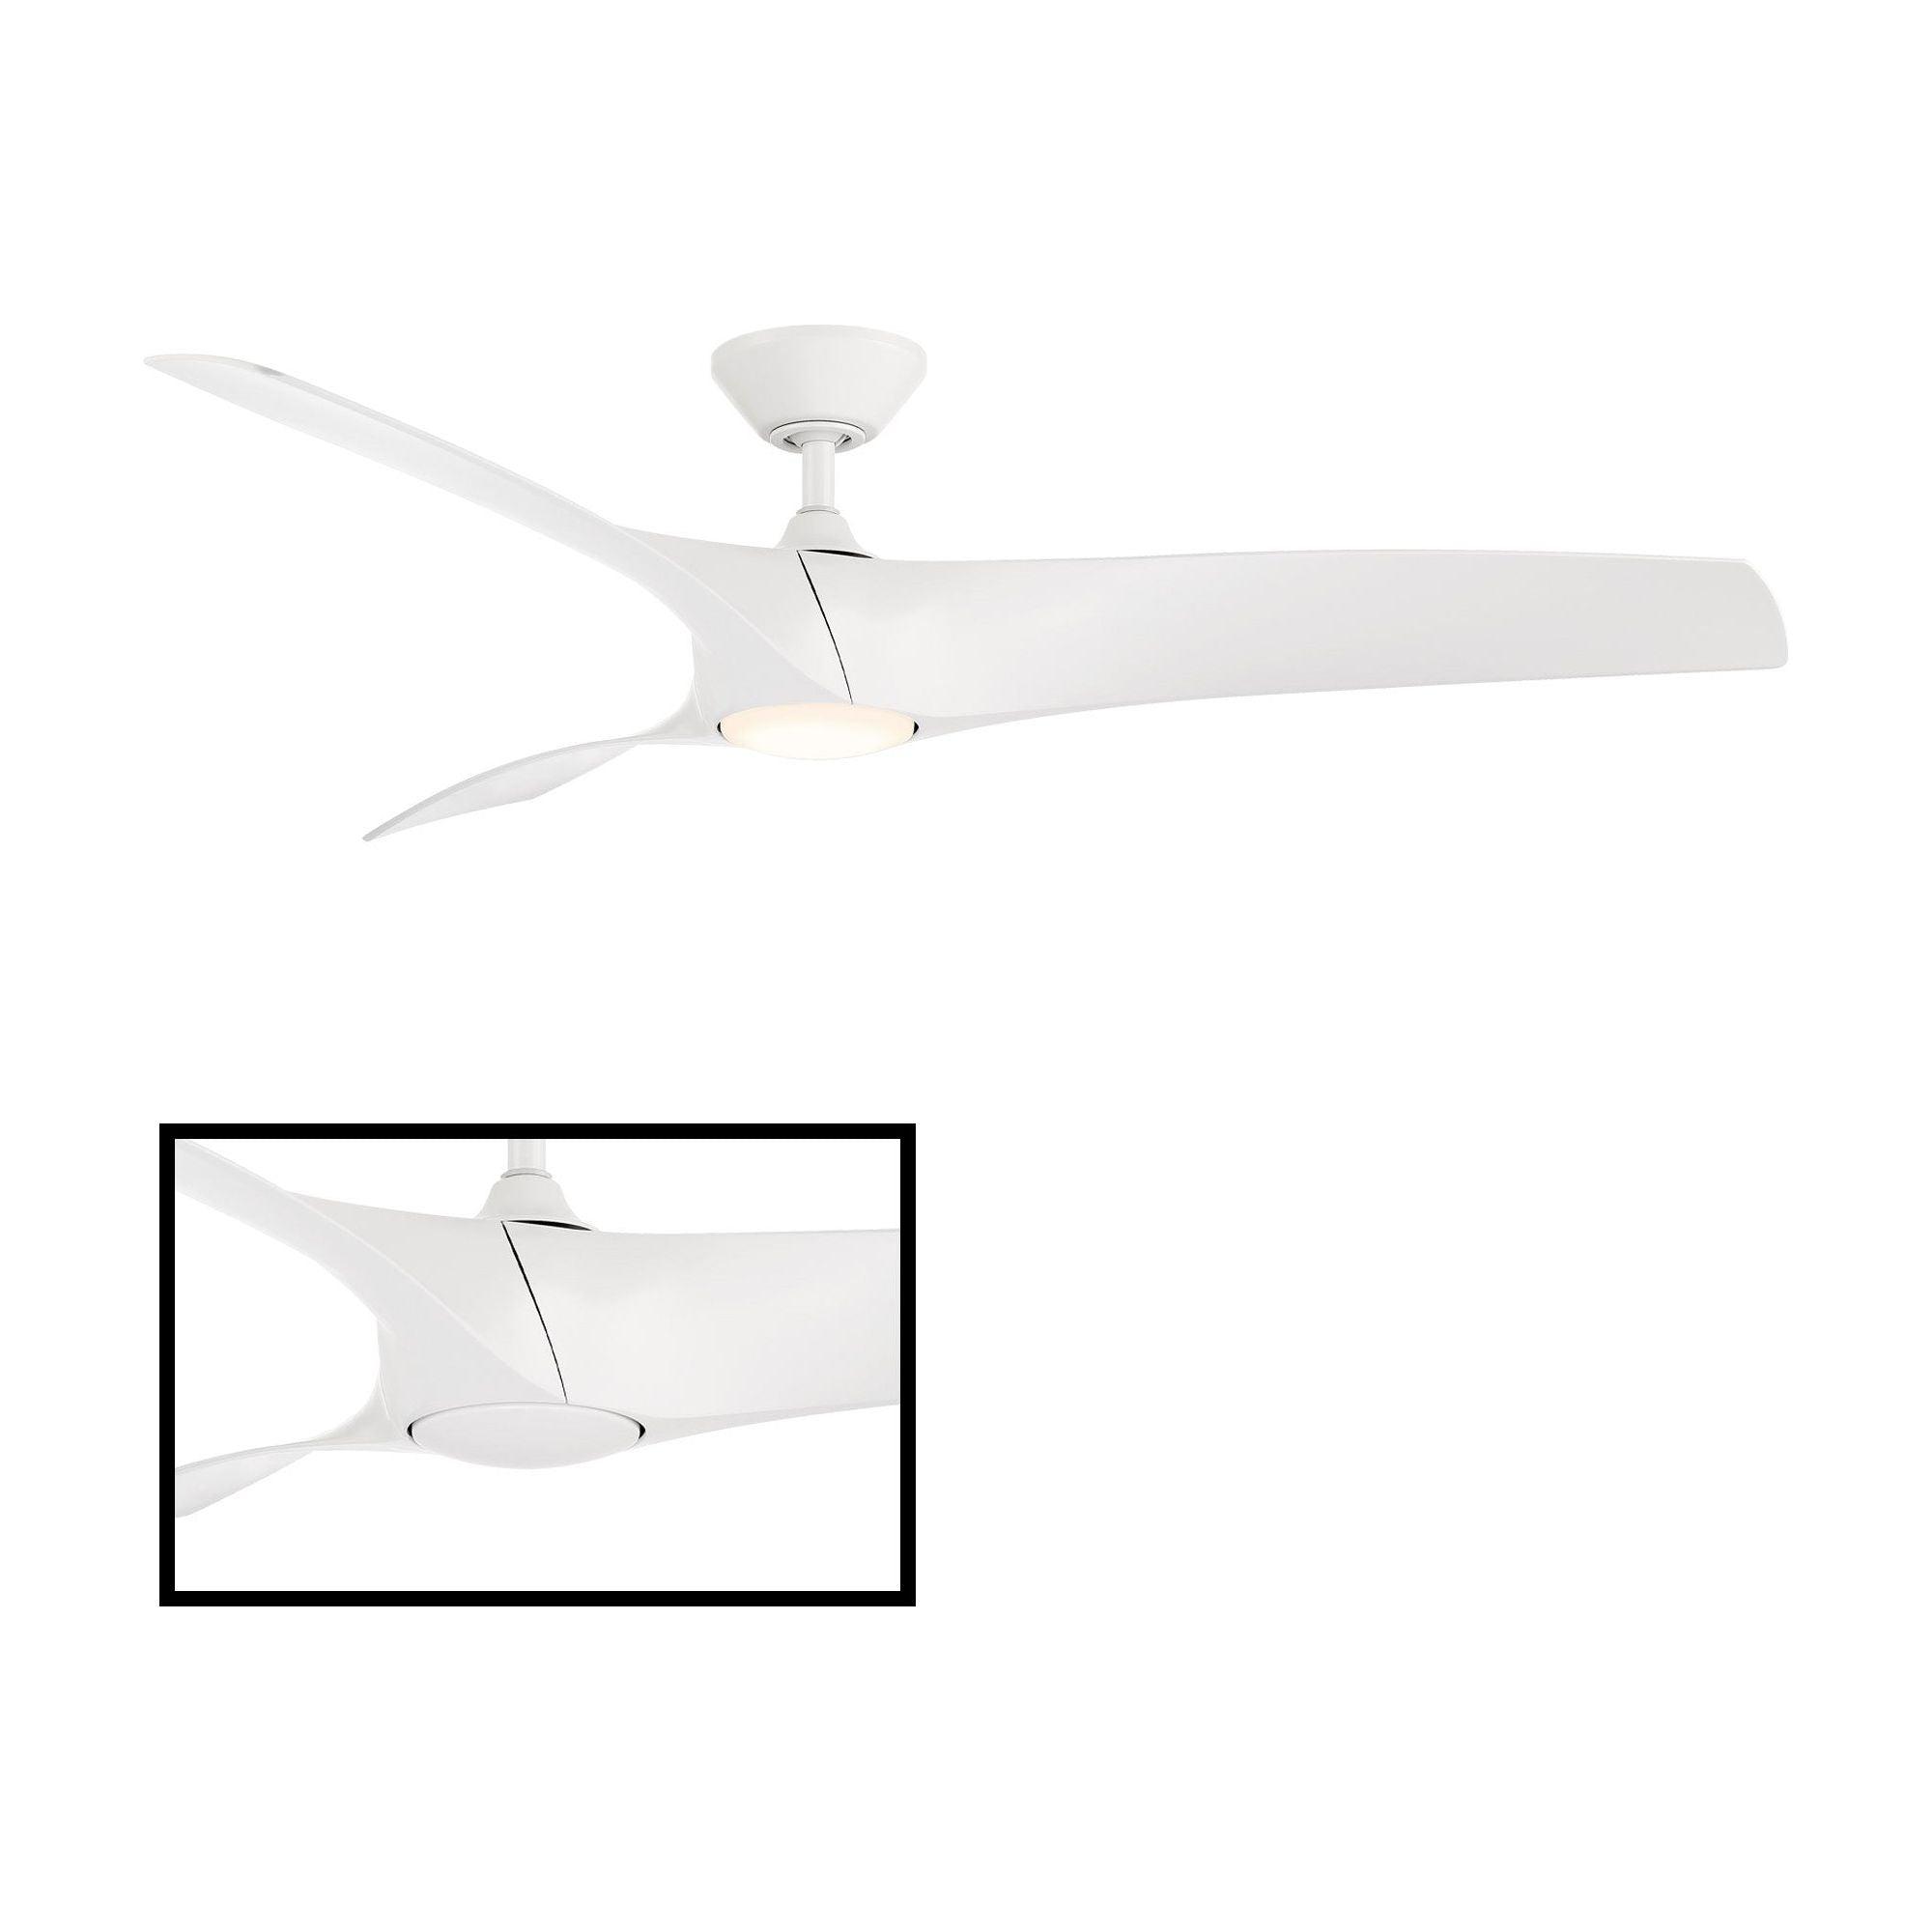 Modern Forms - Zephyr Indoor/Outdoor 3-Blade 52" Smart Ceiling Fan with LED Light Kit and Remote Control - Lights Canada